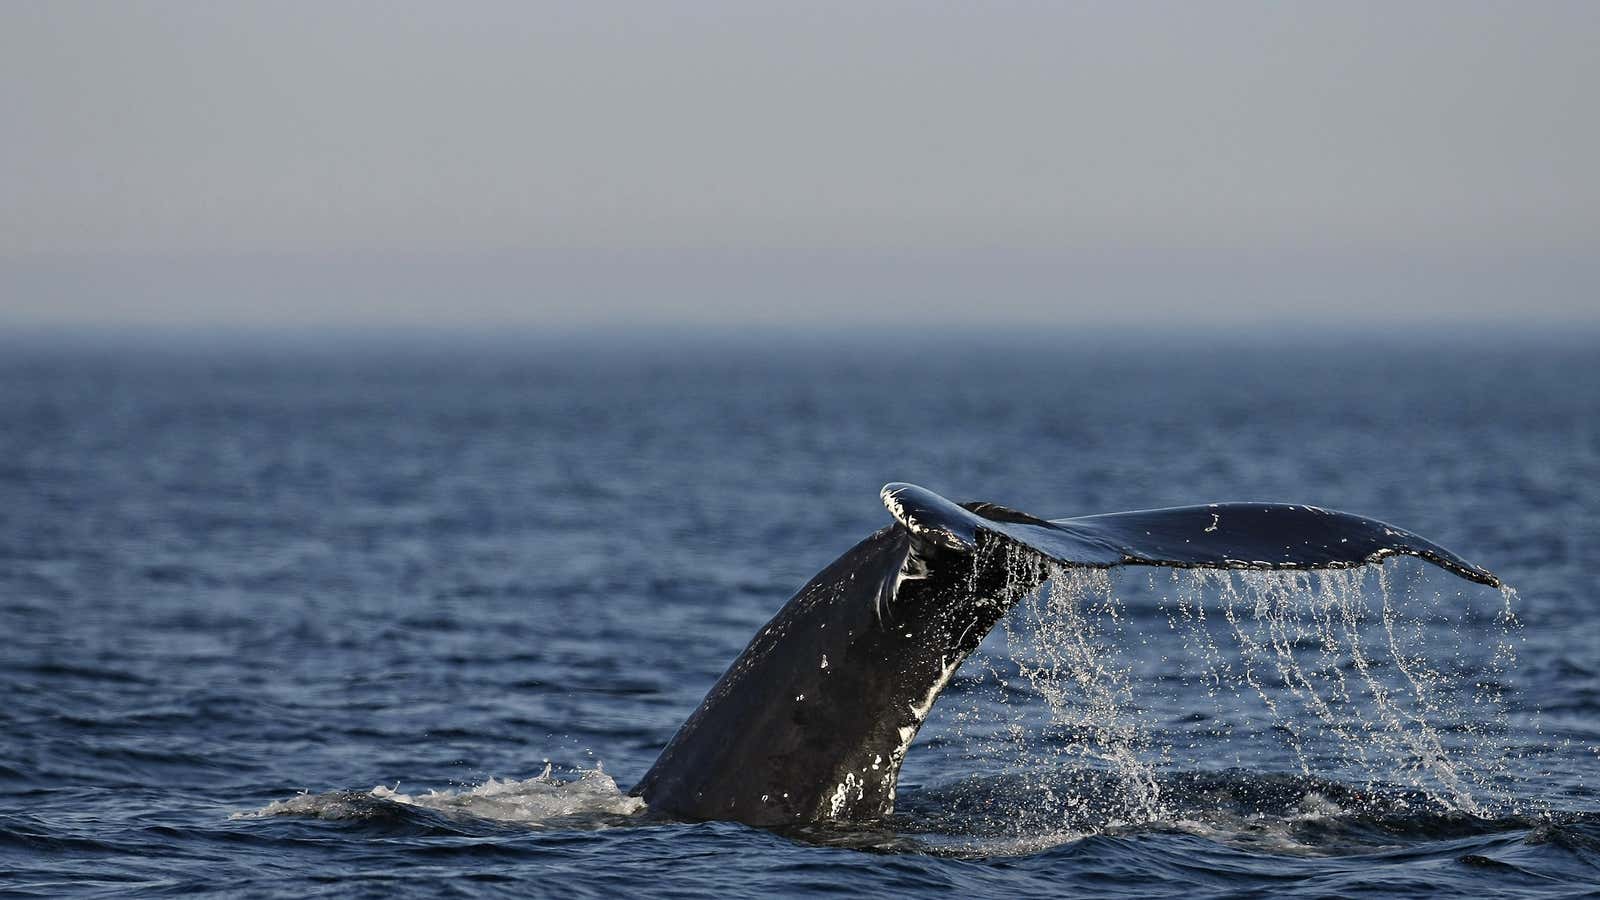 St. Lawrence River is home to several species of whales.